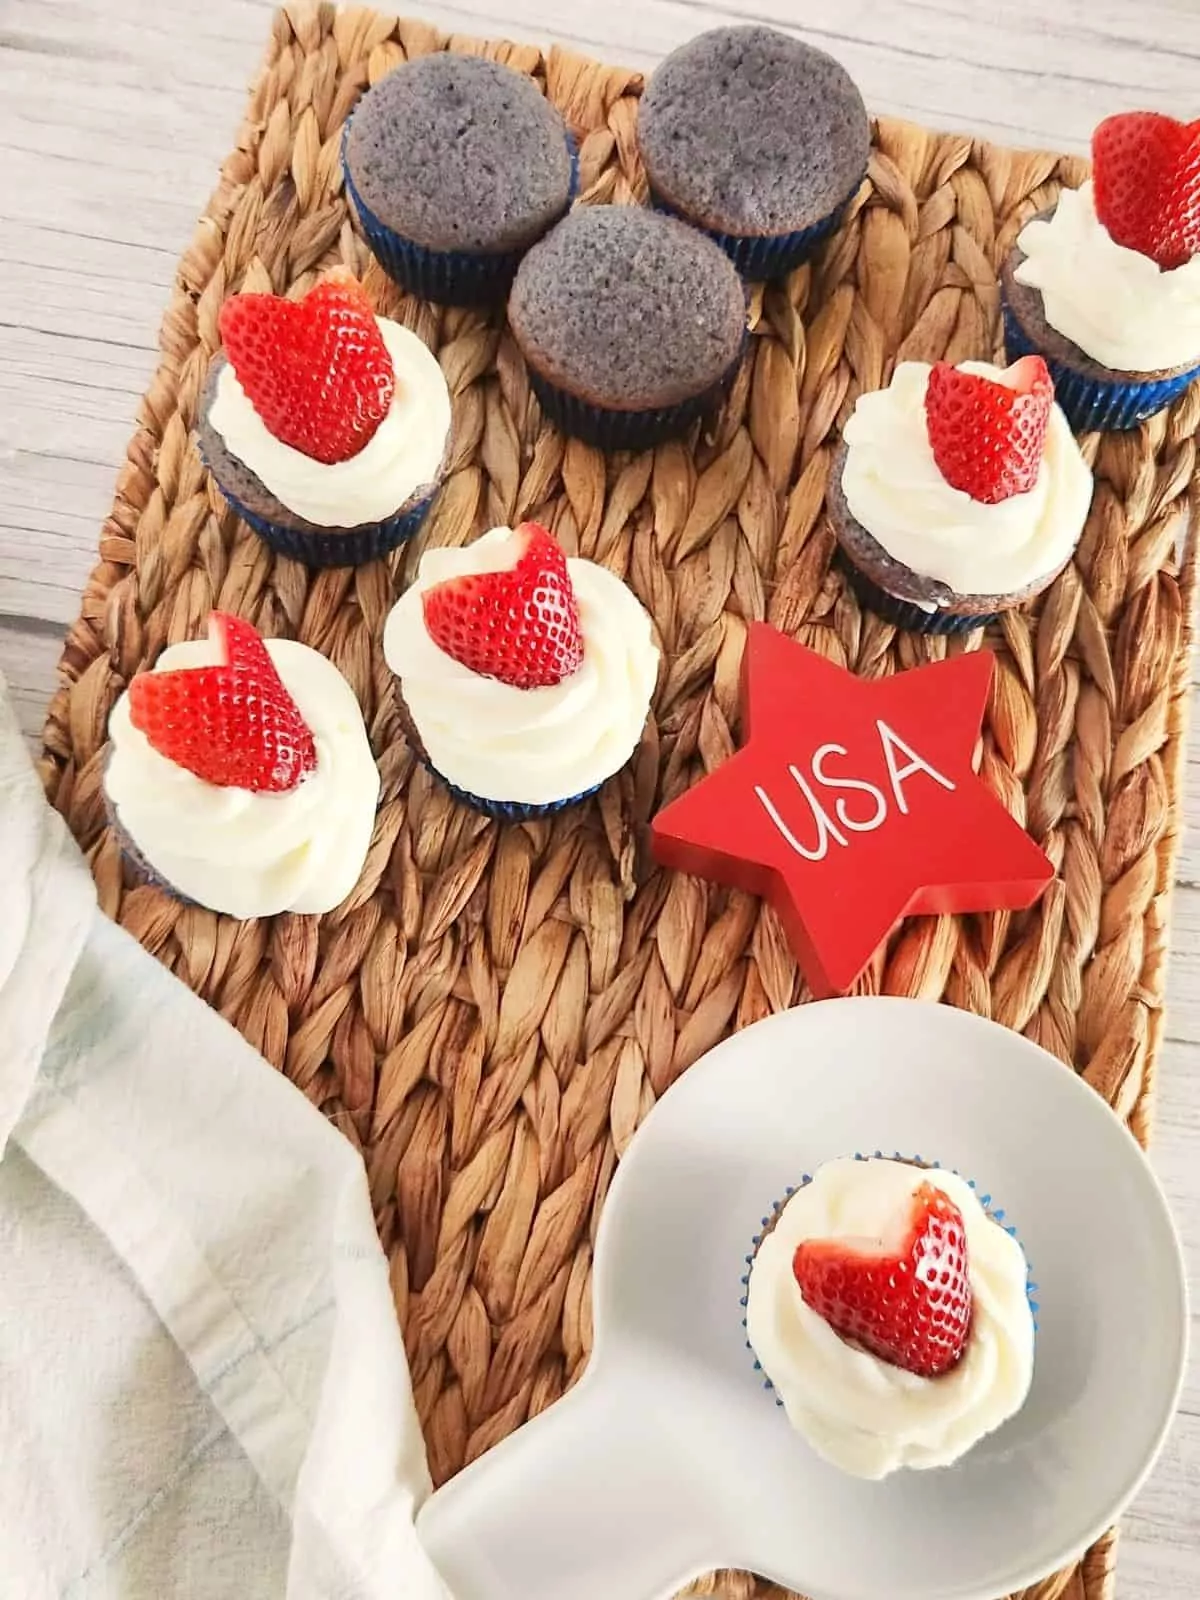 red, white and blue frosted cupcakes on woven mat and white plate.